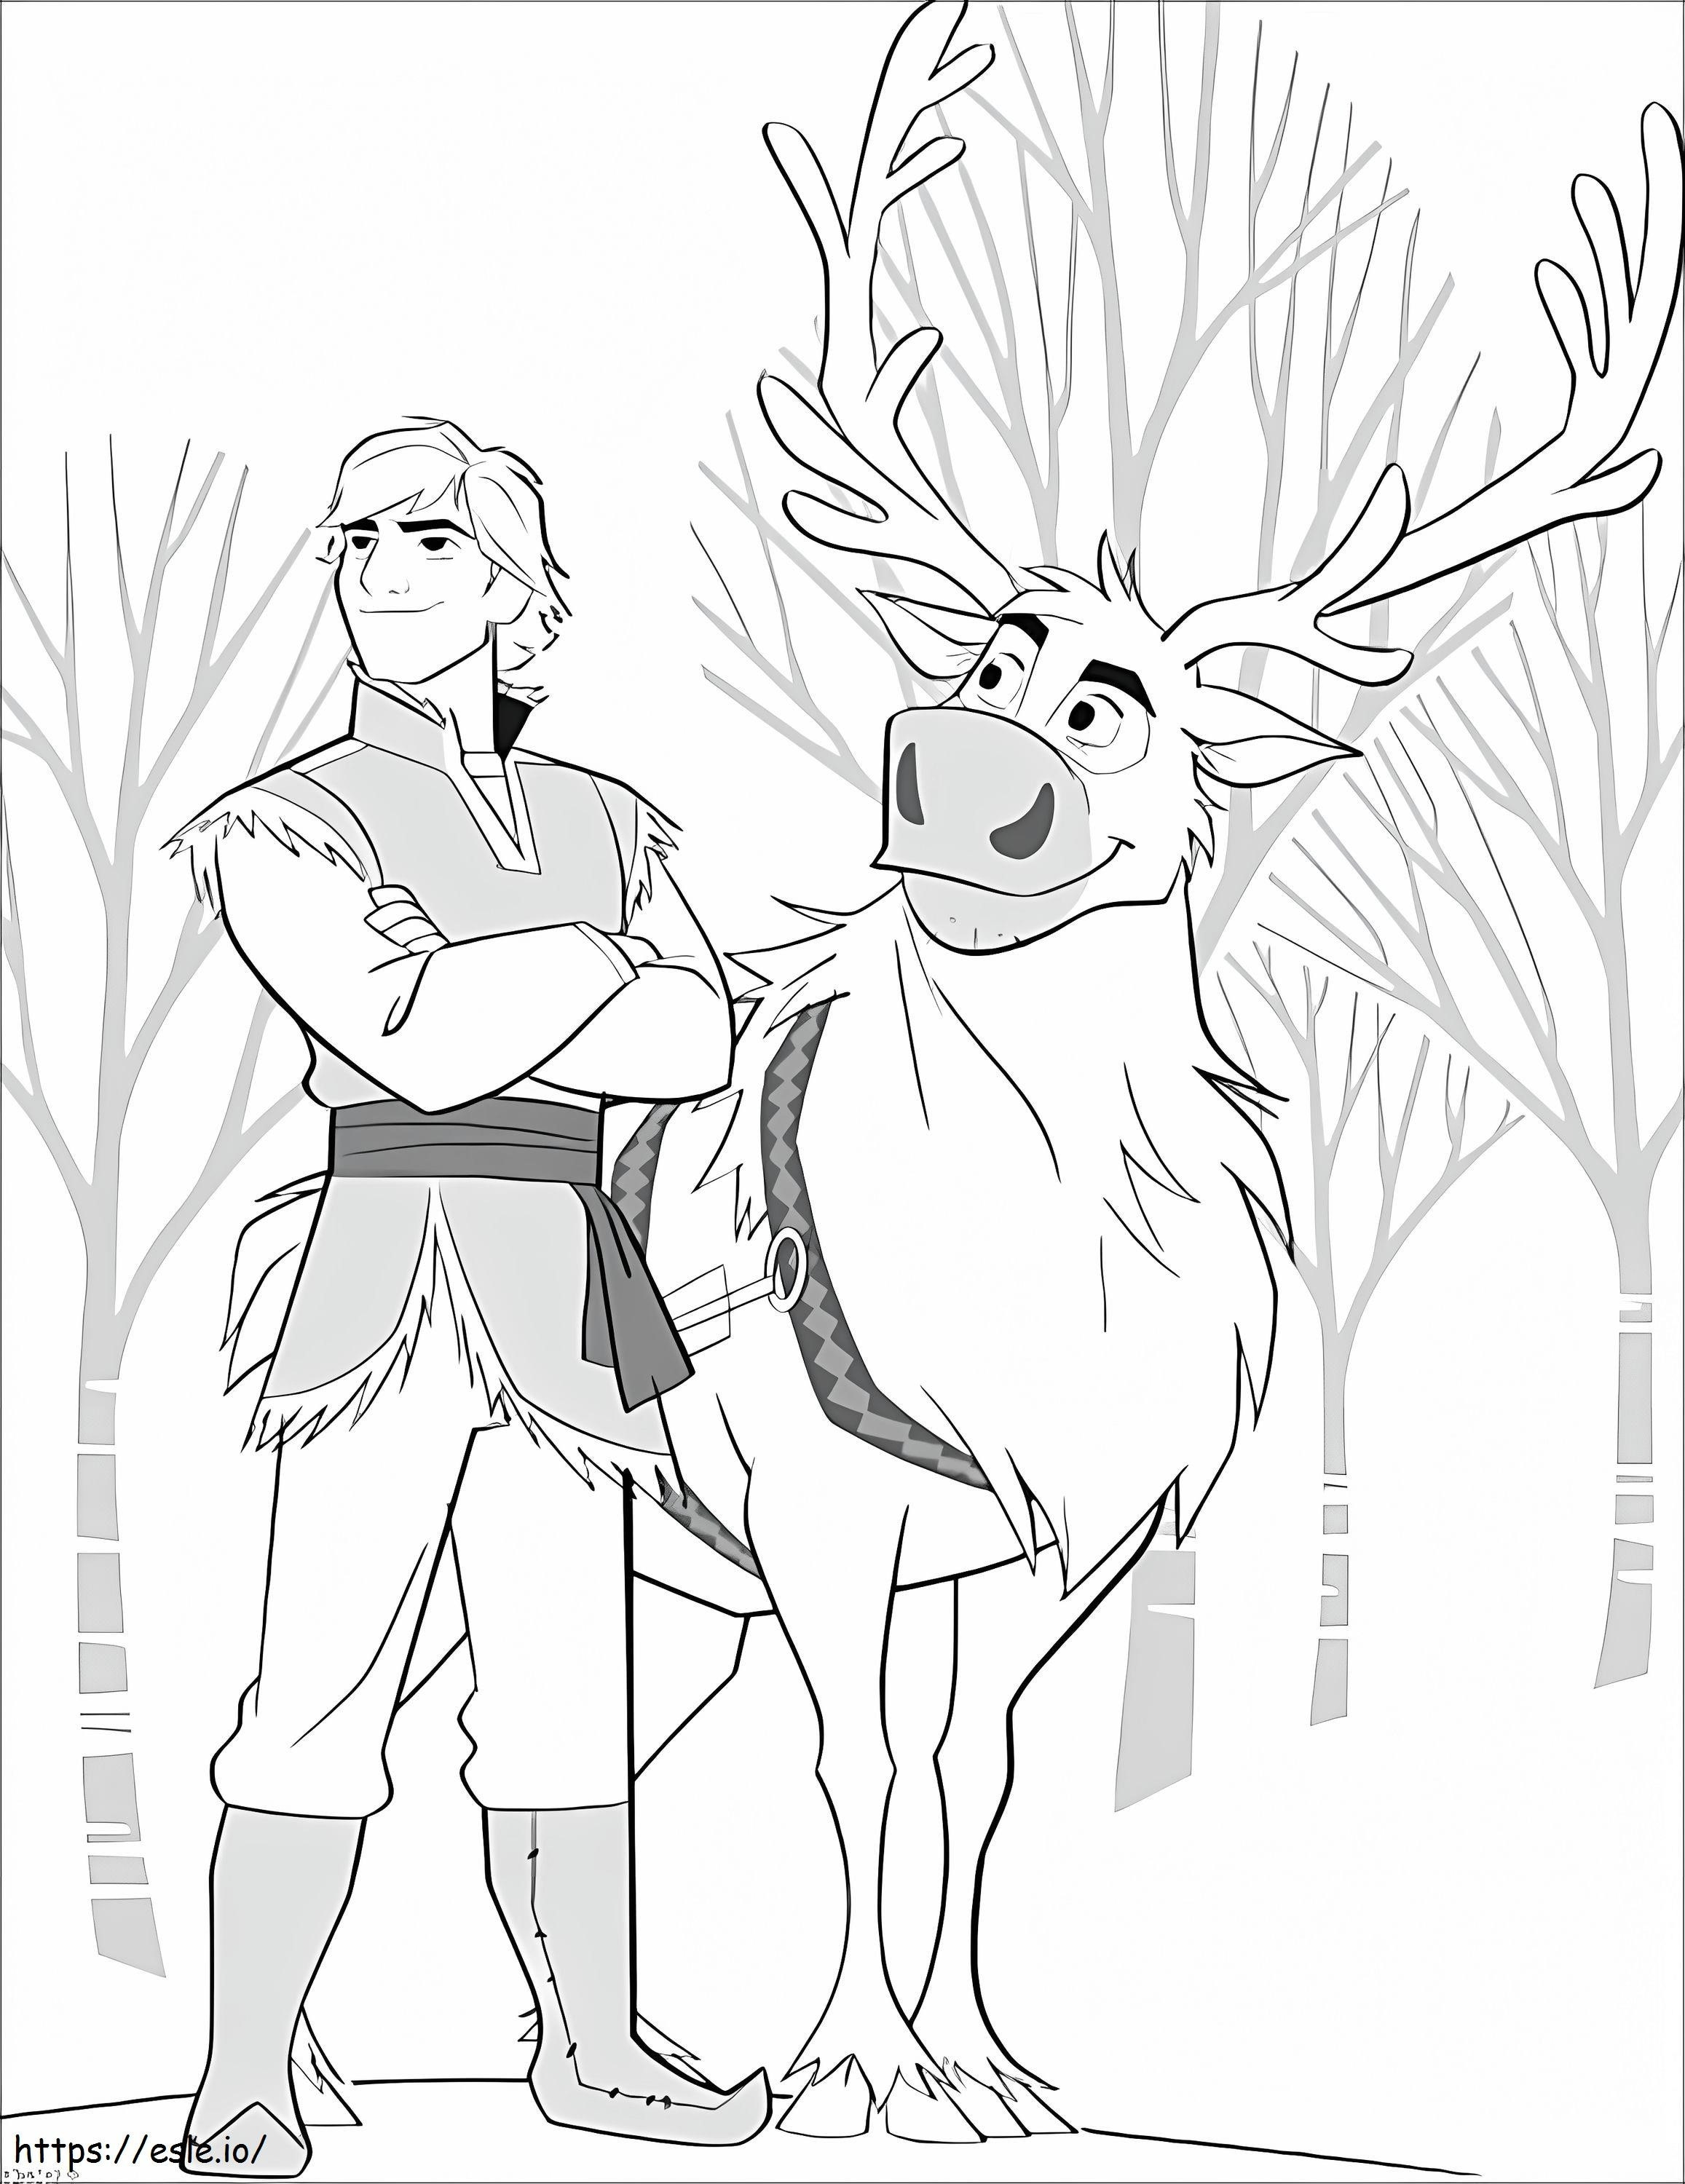 Kristoff A Journeyman coloring page